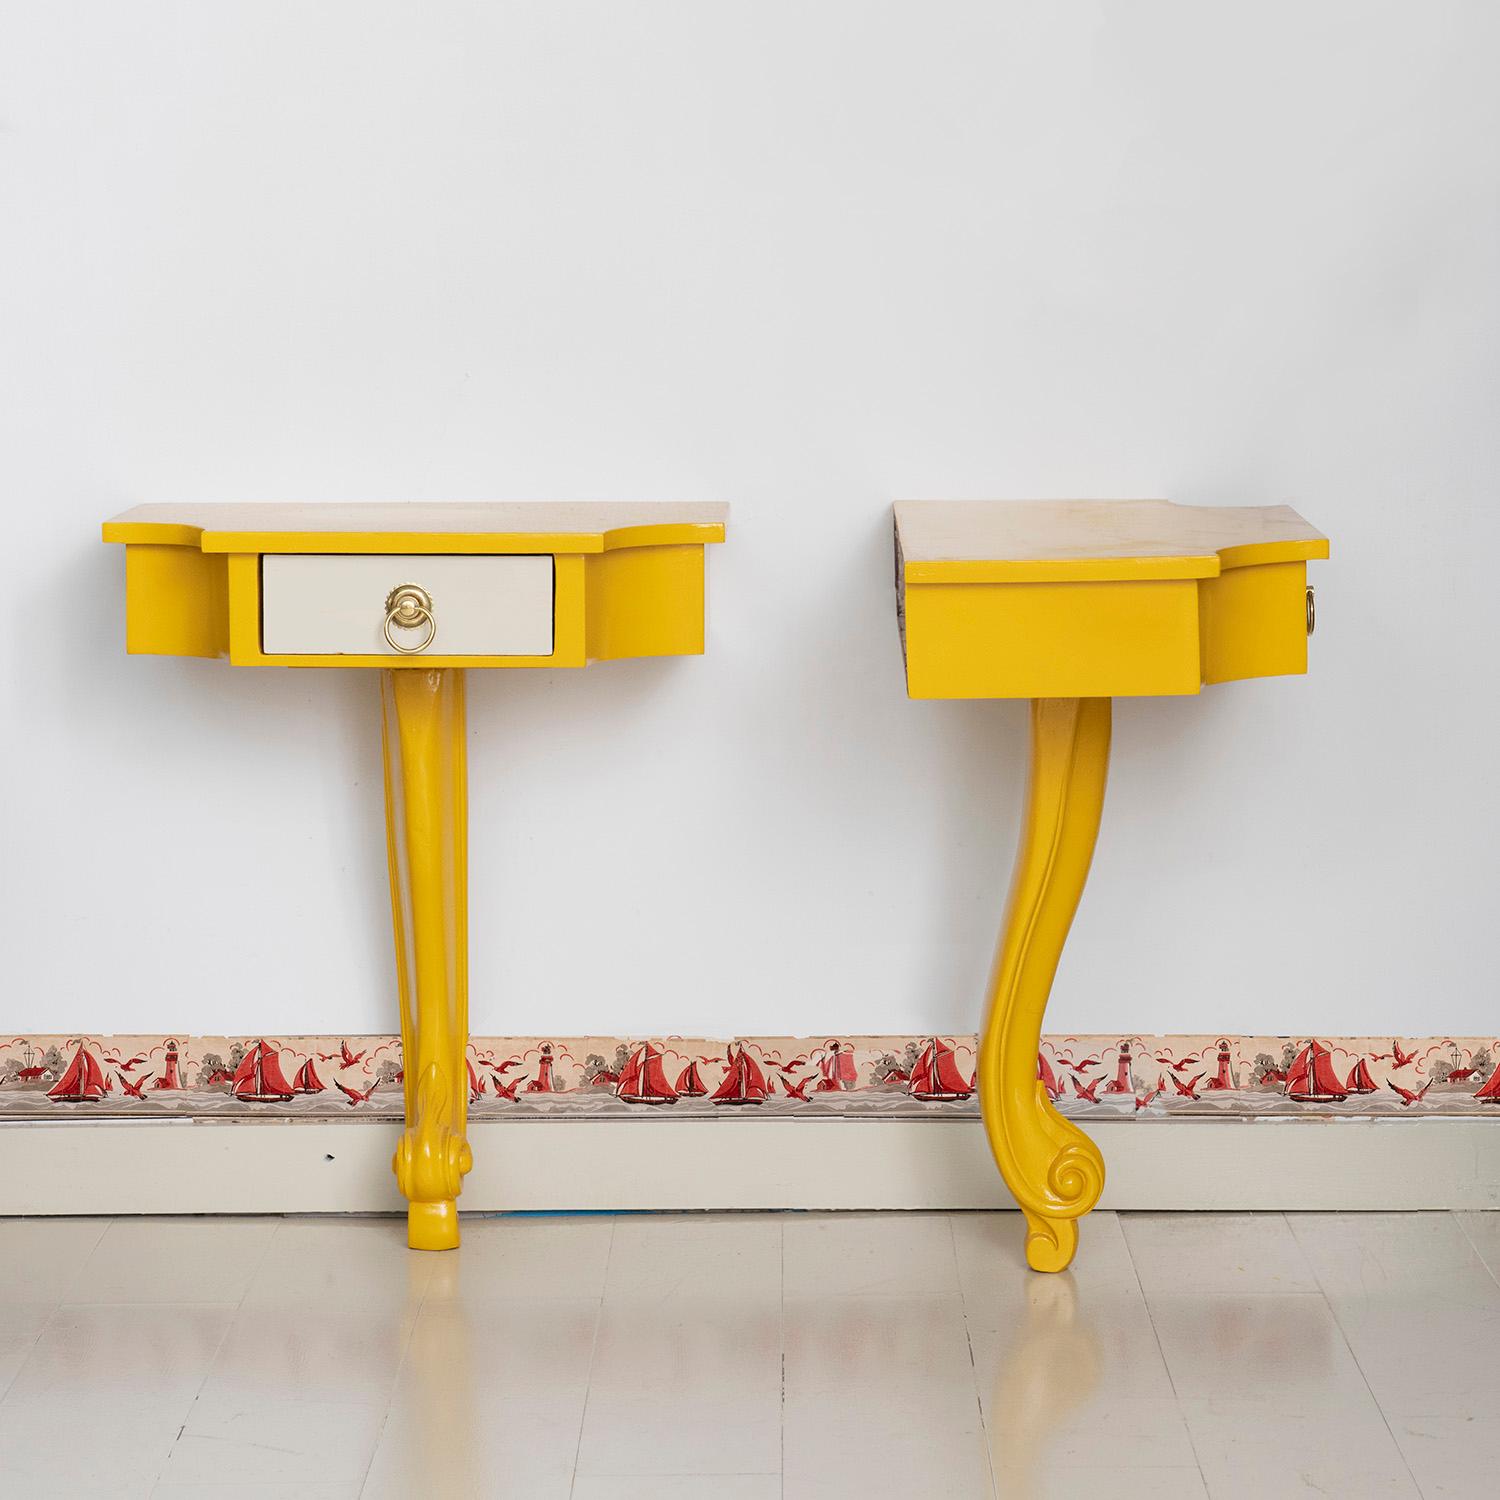 Pair of 20th century American console tables. Playfully reminiscent of Rococo and Renaissance style furniture, these tables are the product of 20th century American design innovation.